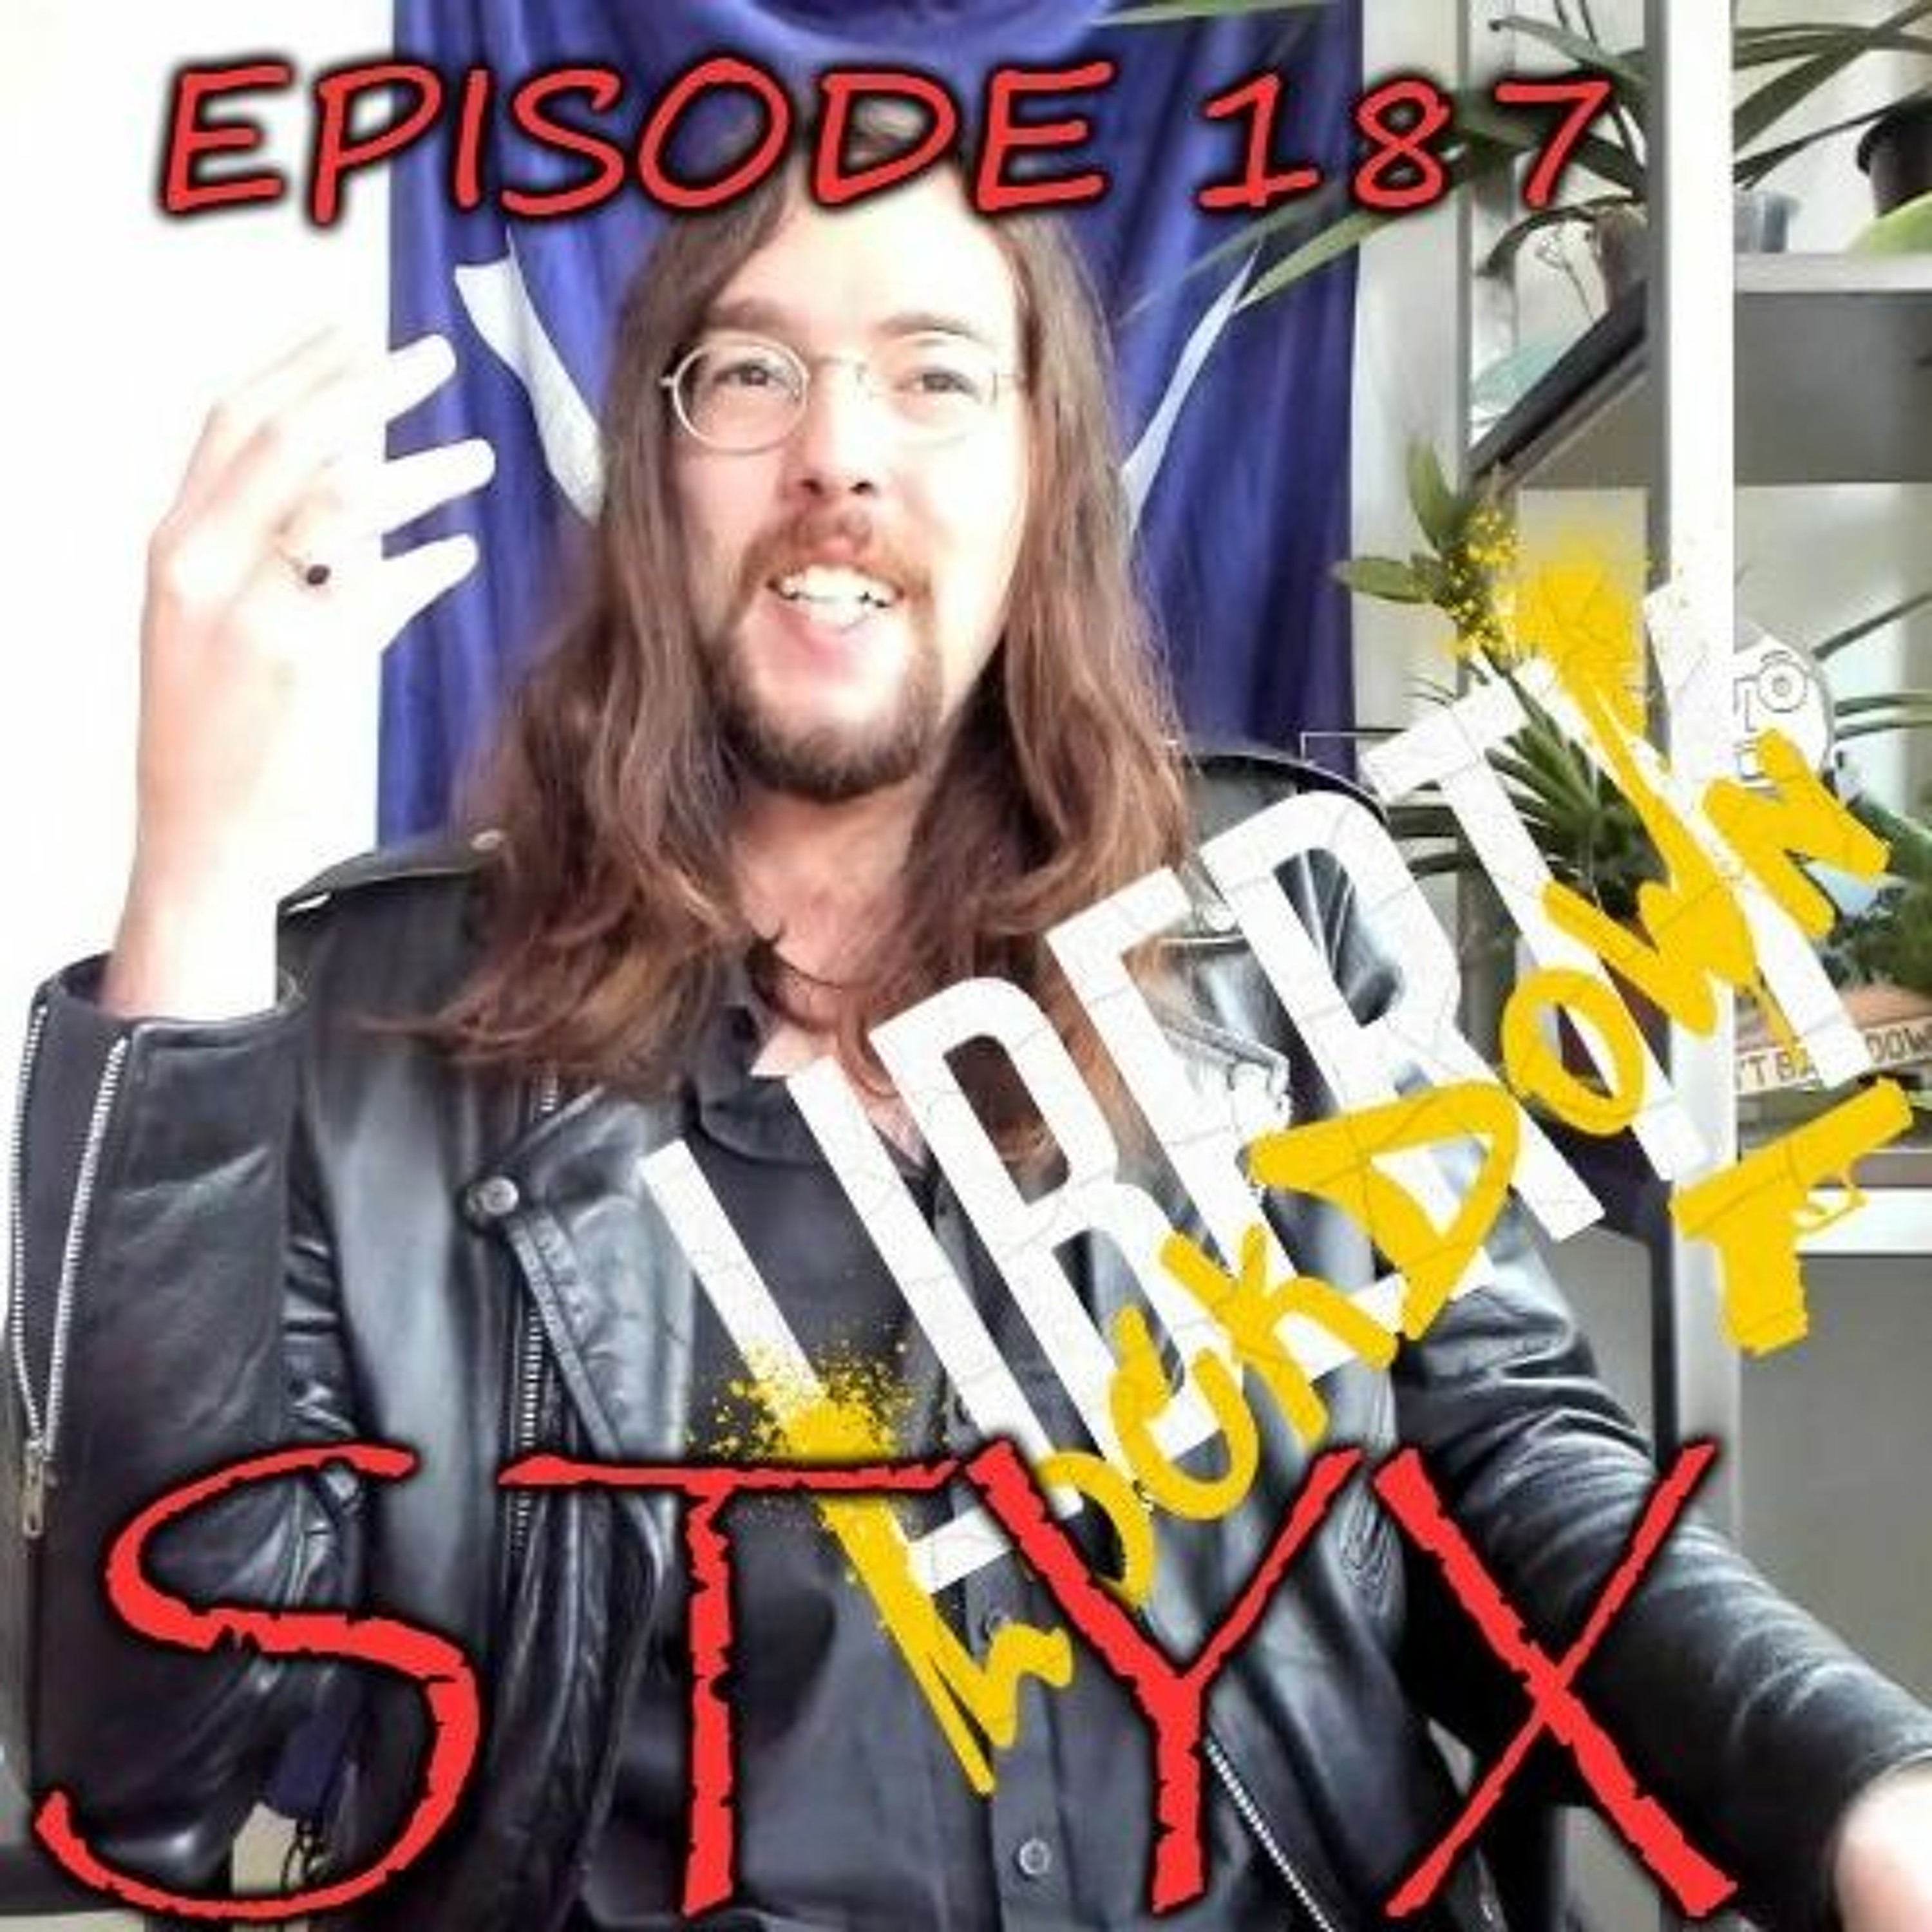 Ep 187 Why Trump's 2nd Term Could Deliver w/ Styxhexenhammer666